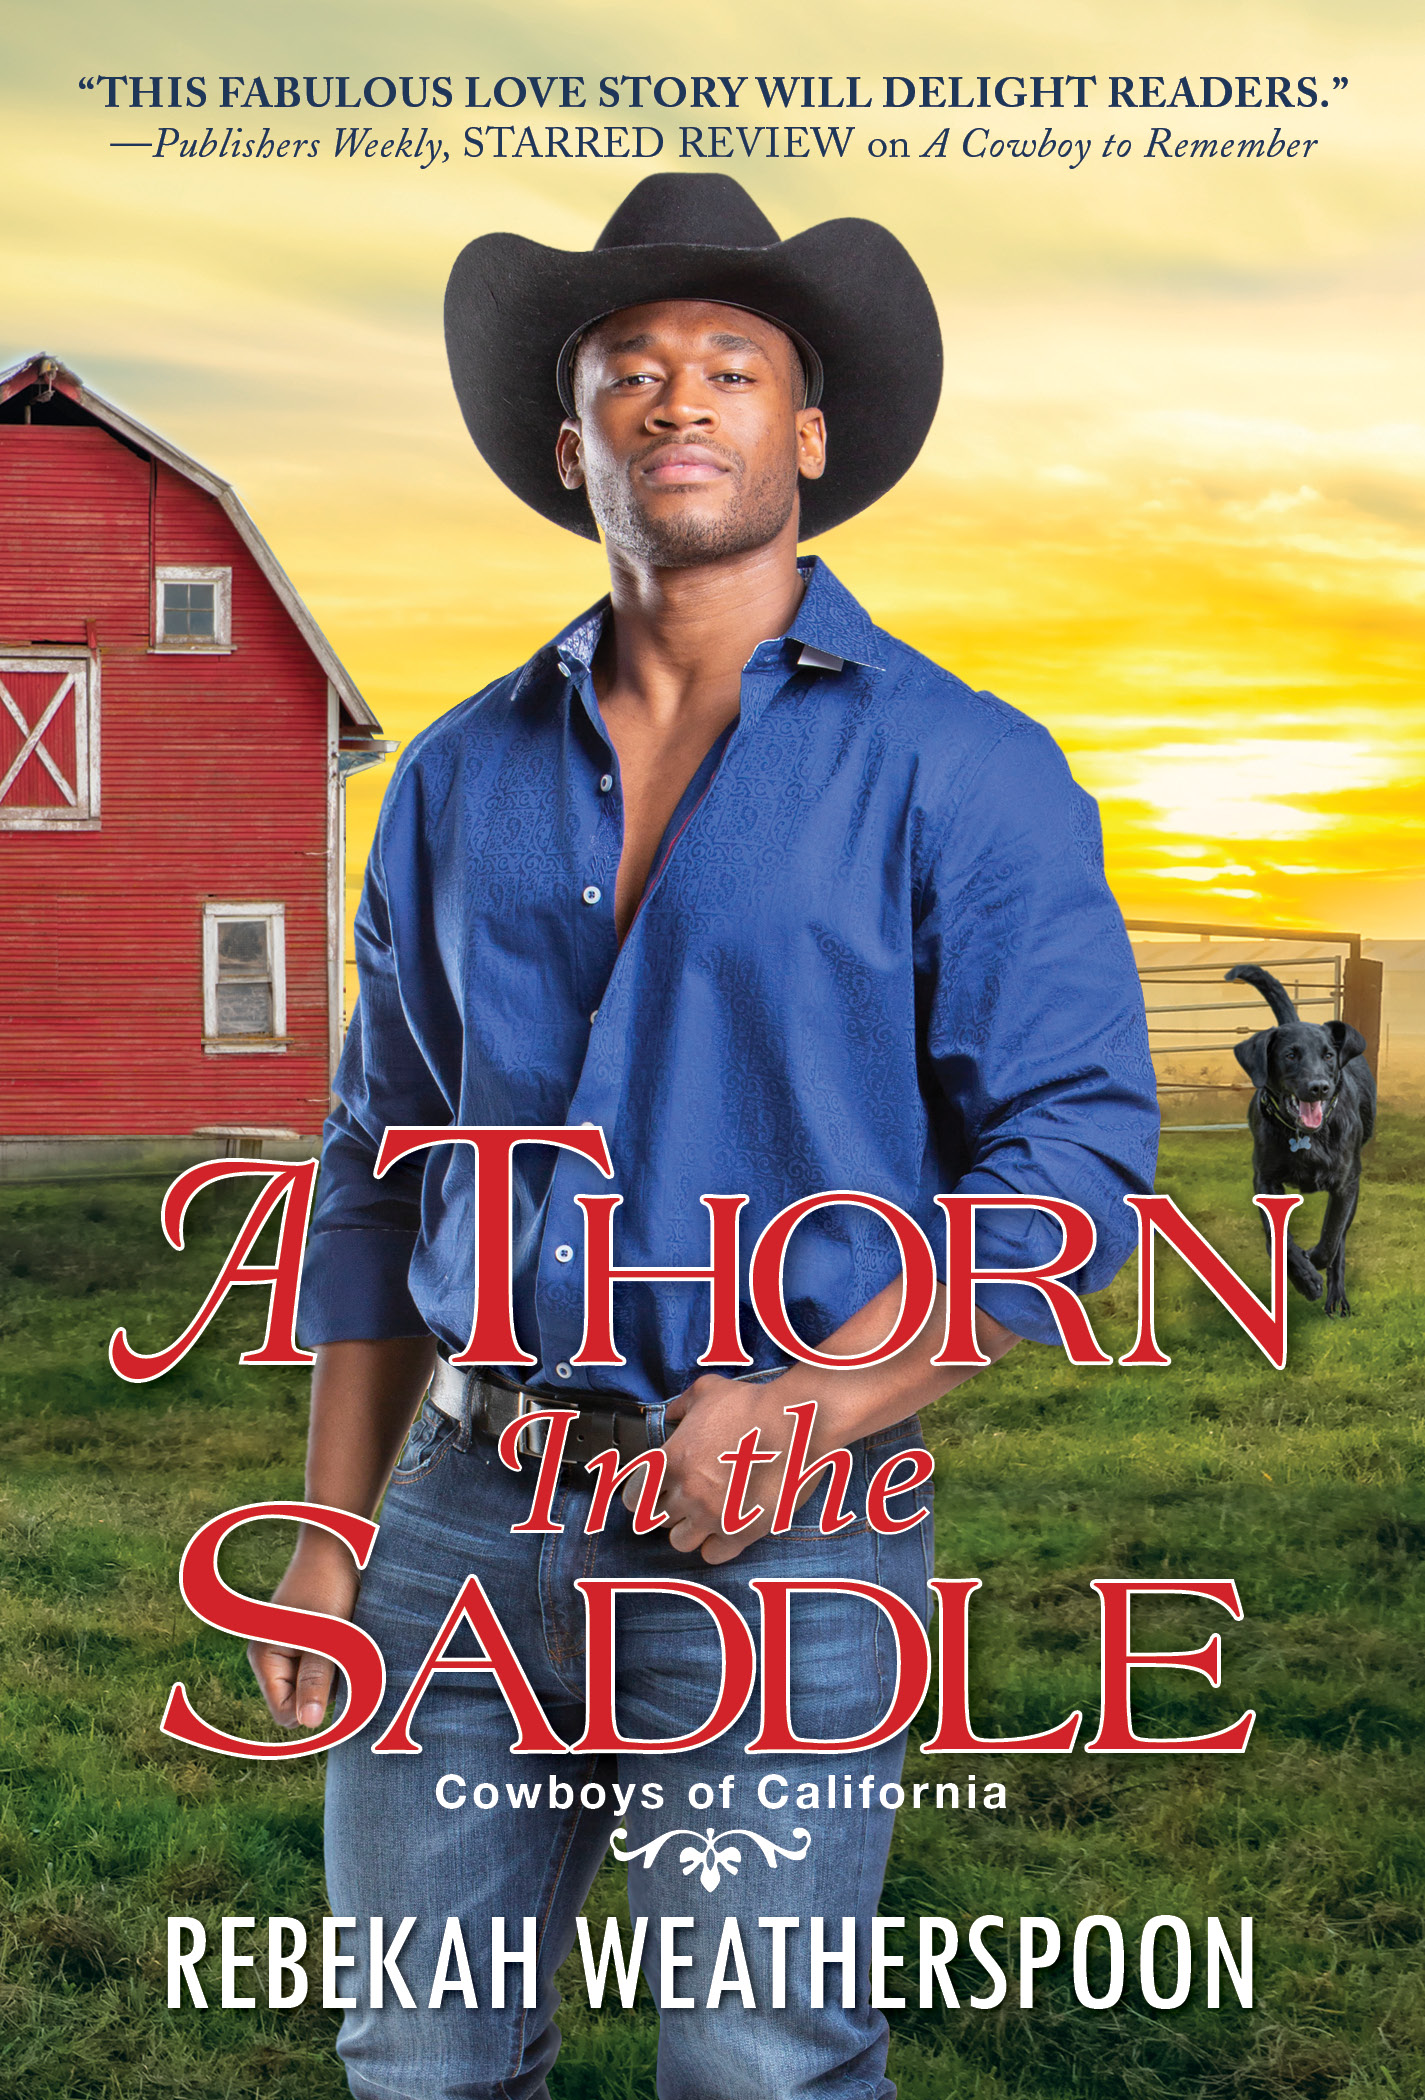 Title: A Thorn In the Saddle by Rebekah Weatherspoon. An African American Man in a Black cowboy hat stands in front of a red barn with a black lab dog.